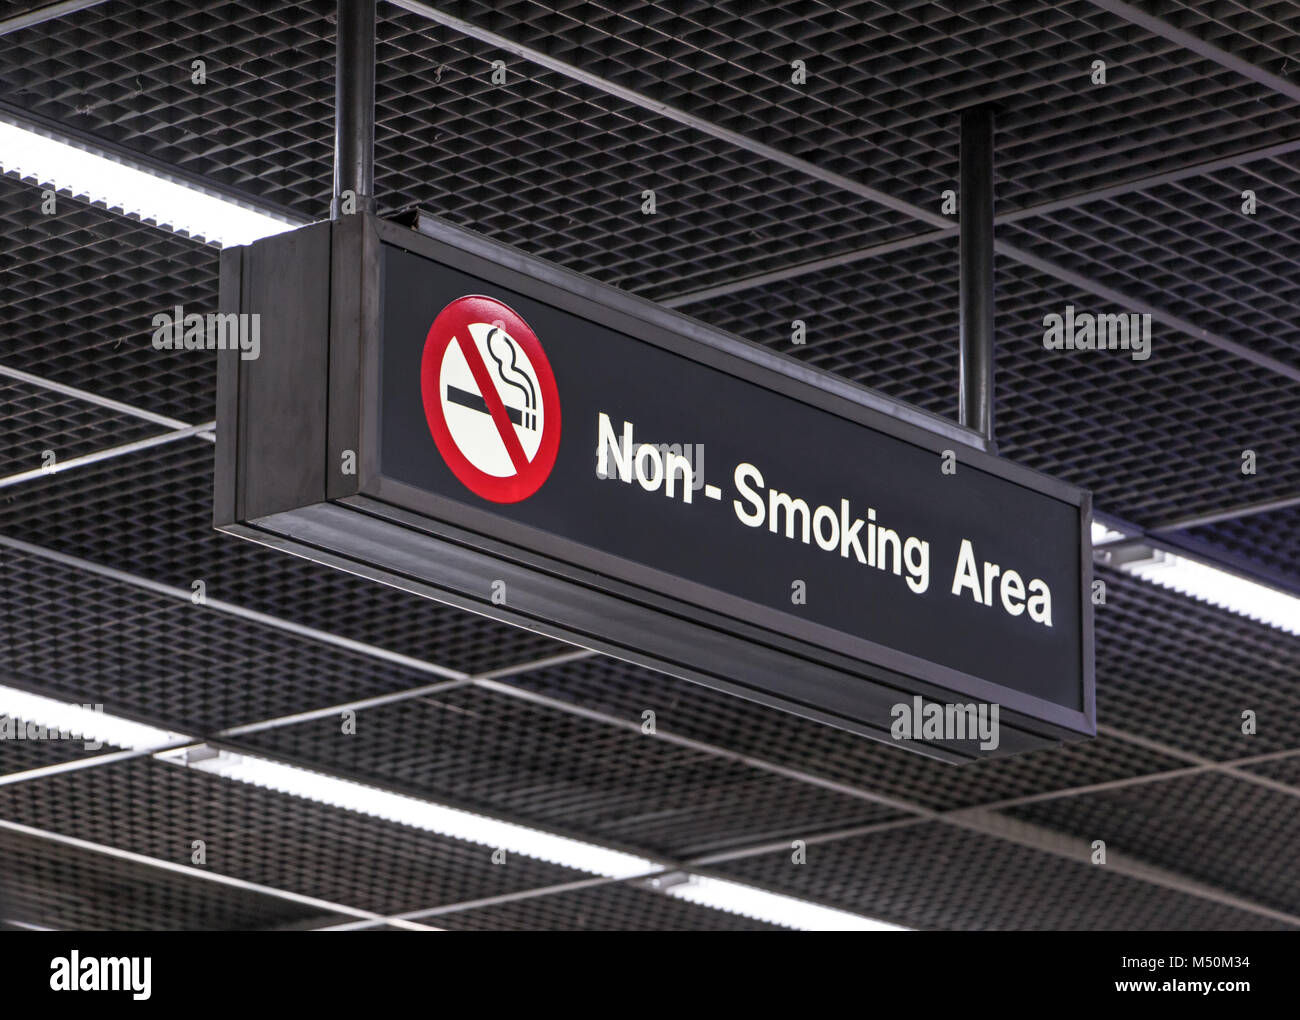 Notification signs for the smoking ban hang from the airport terminal ceiling. Non smoking area. Stock Photo